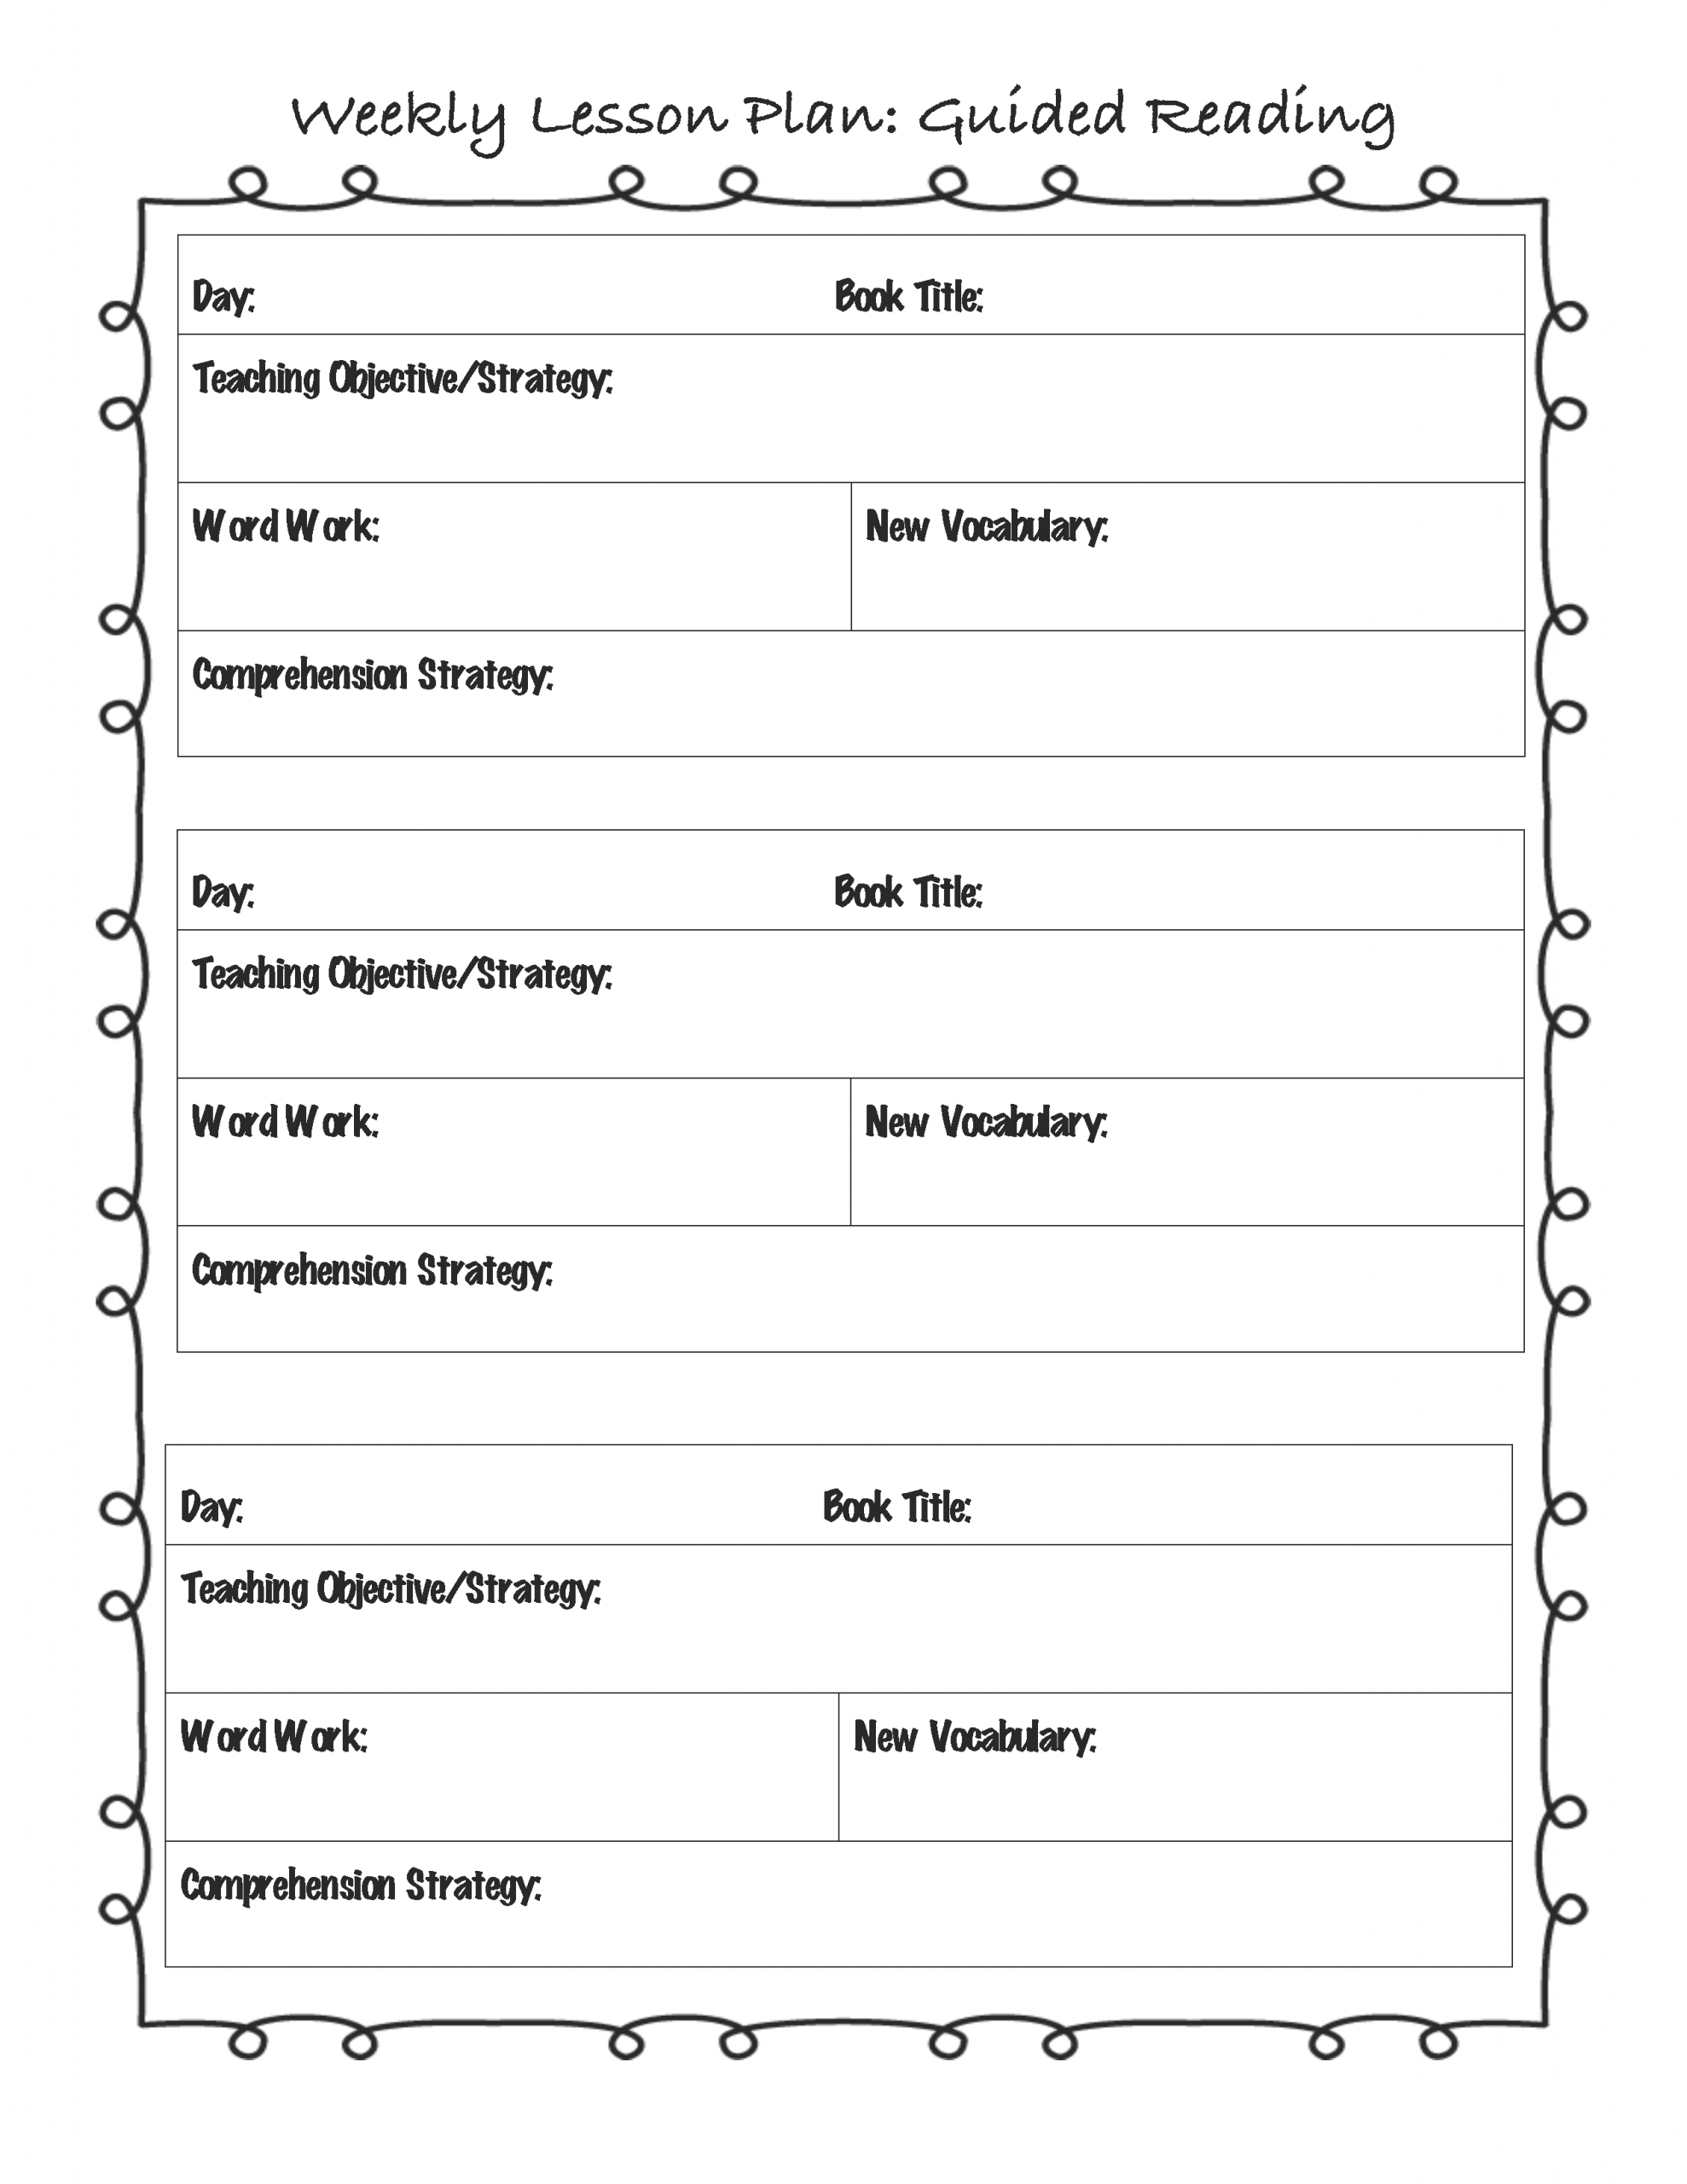 Lesson Plan Template | Weekly Guided Reading Lesson Plan